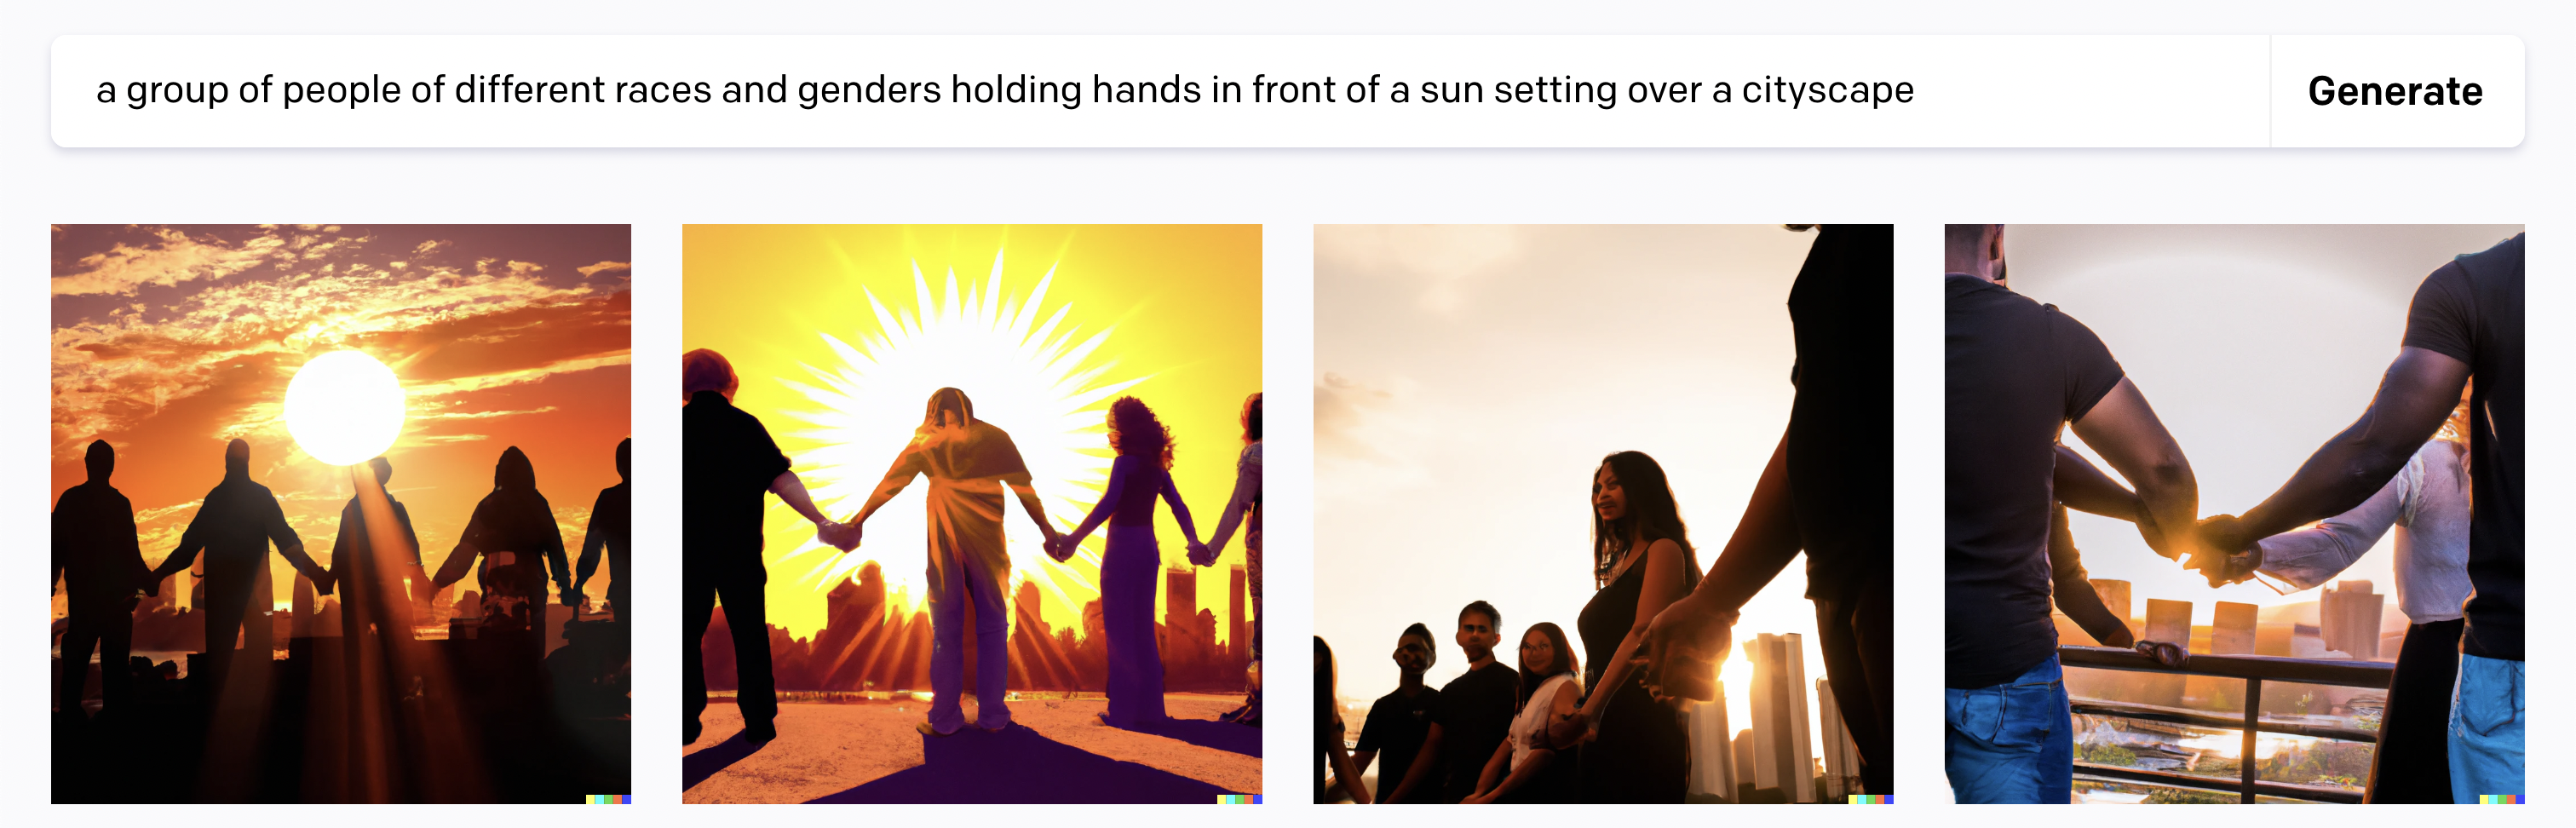 a group of people of different races and genders holding hands in front of a sun setting over a cityscape